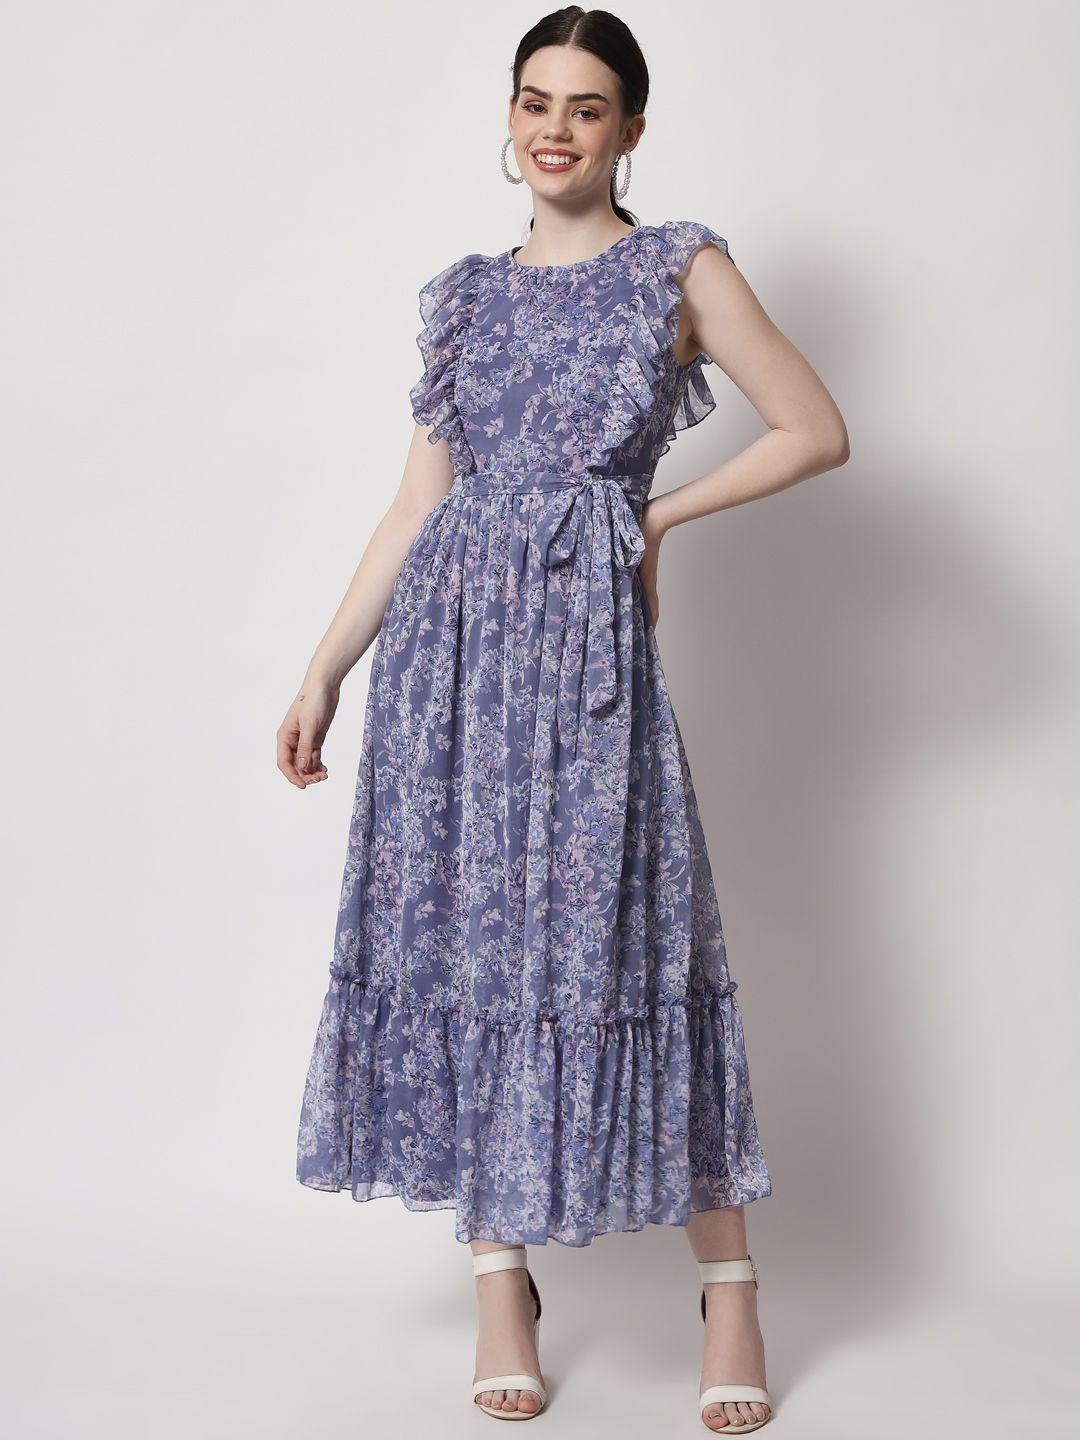 here&now women blue & purple floral printed fit and flare dress